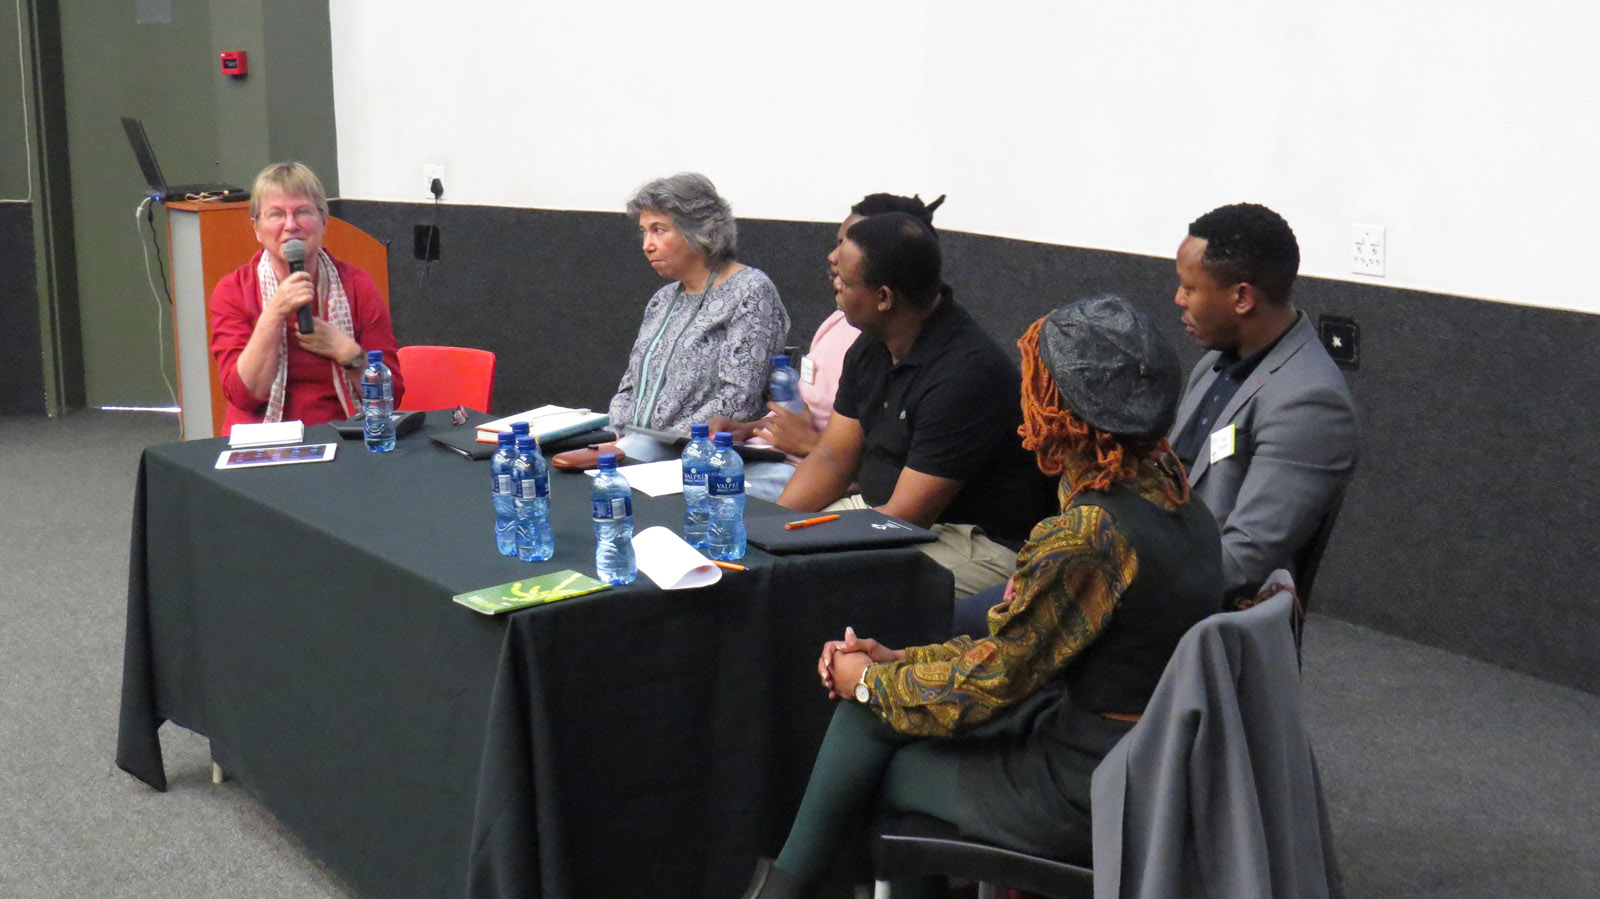 Click the image for a view of: Isabel Hofmeyr chairing the roundtable: South African book arts as a democratic force. Sunday 26 March